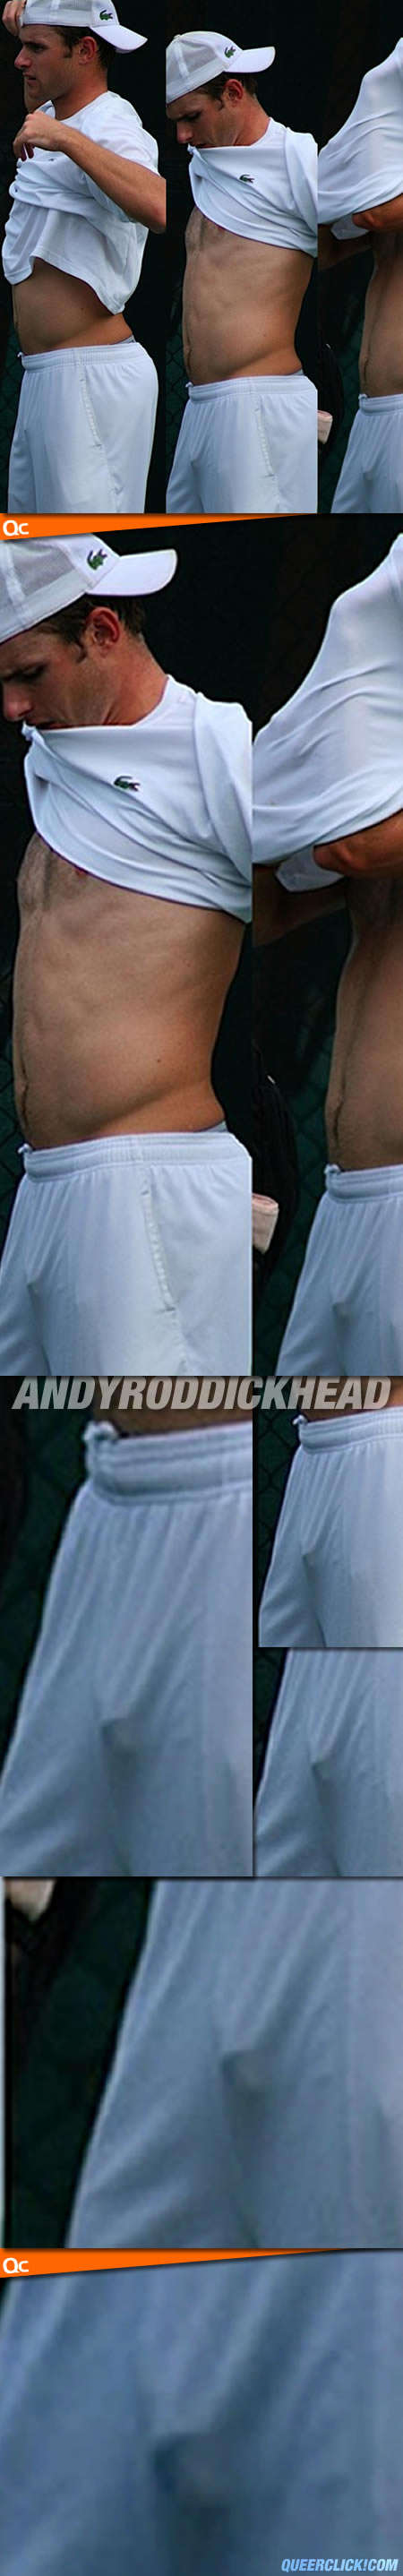 Andy roddick naked dick-pics and galleries